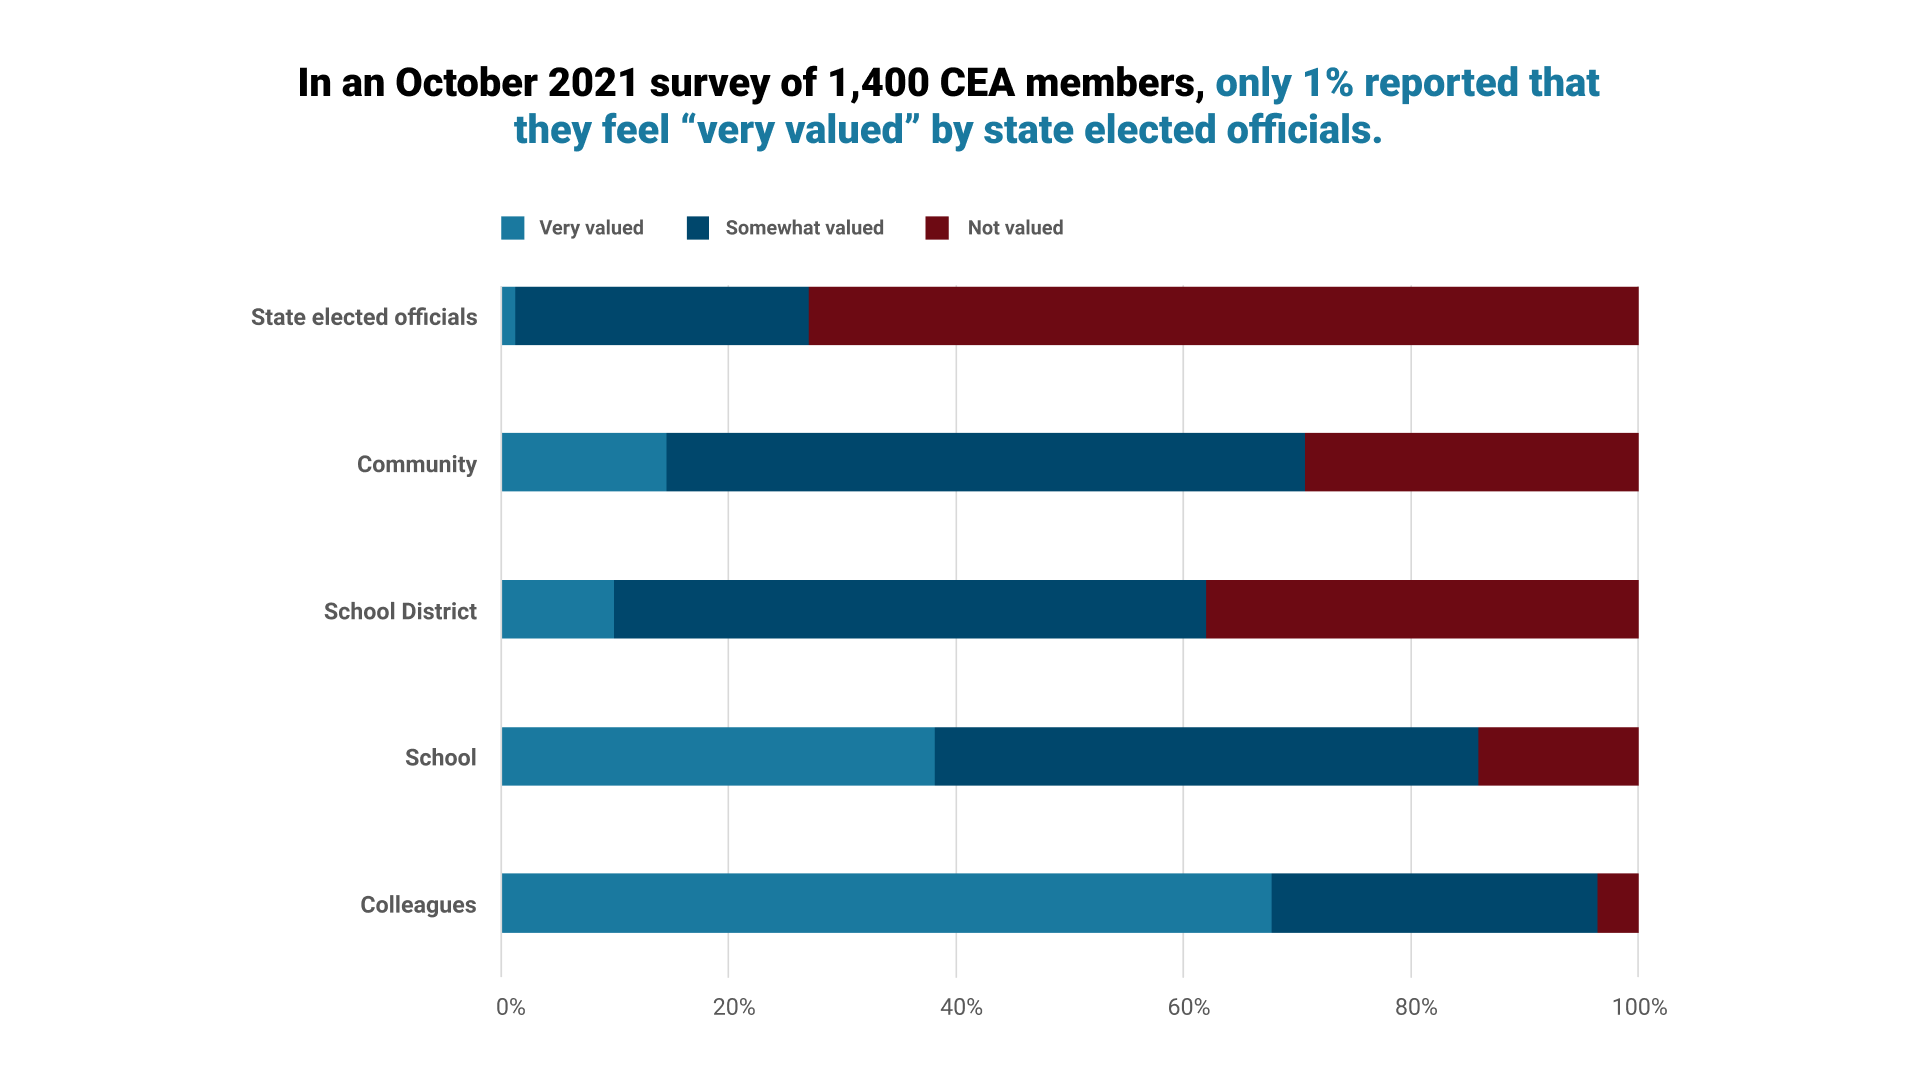 Bar chart showing how CEA members feel valued from various groups including elected officials, community, school district, and coworkers